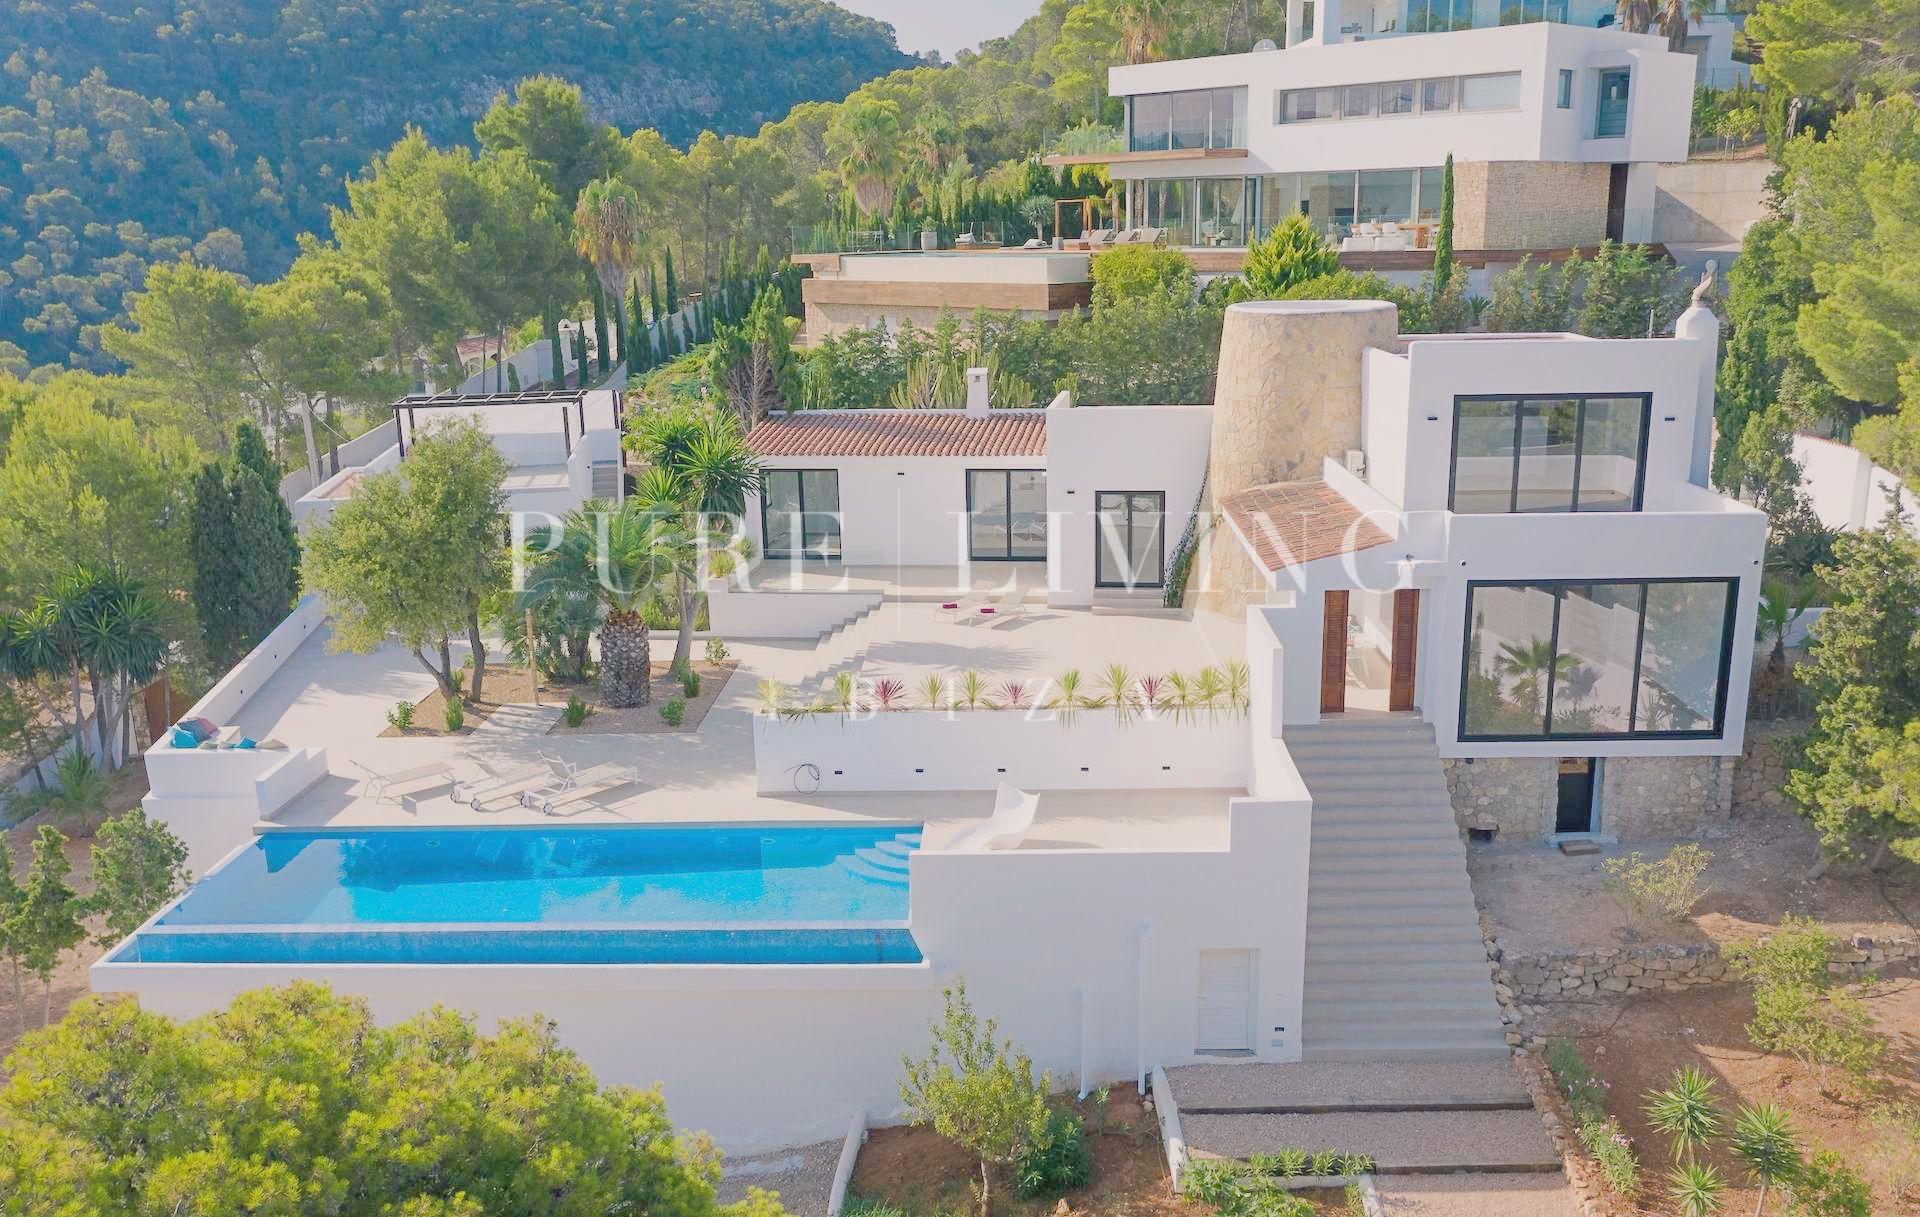 Elegantly renovated villa in Cala Moli, San José, offering sea views and modern luxury in a private and tranquil setting.